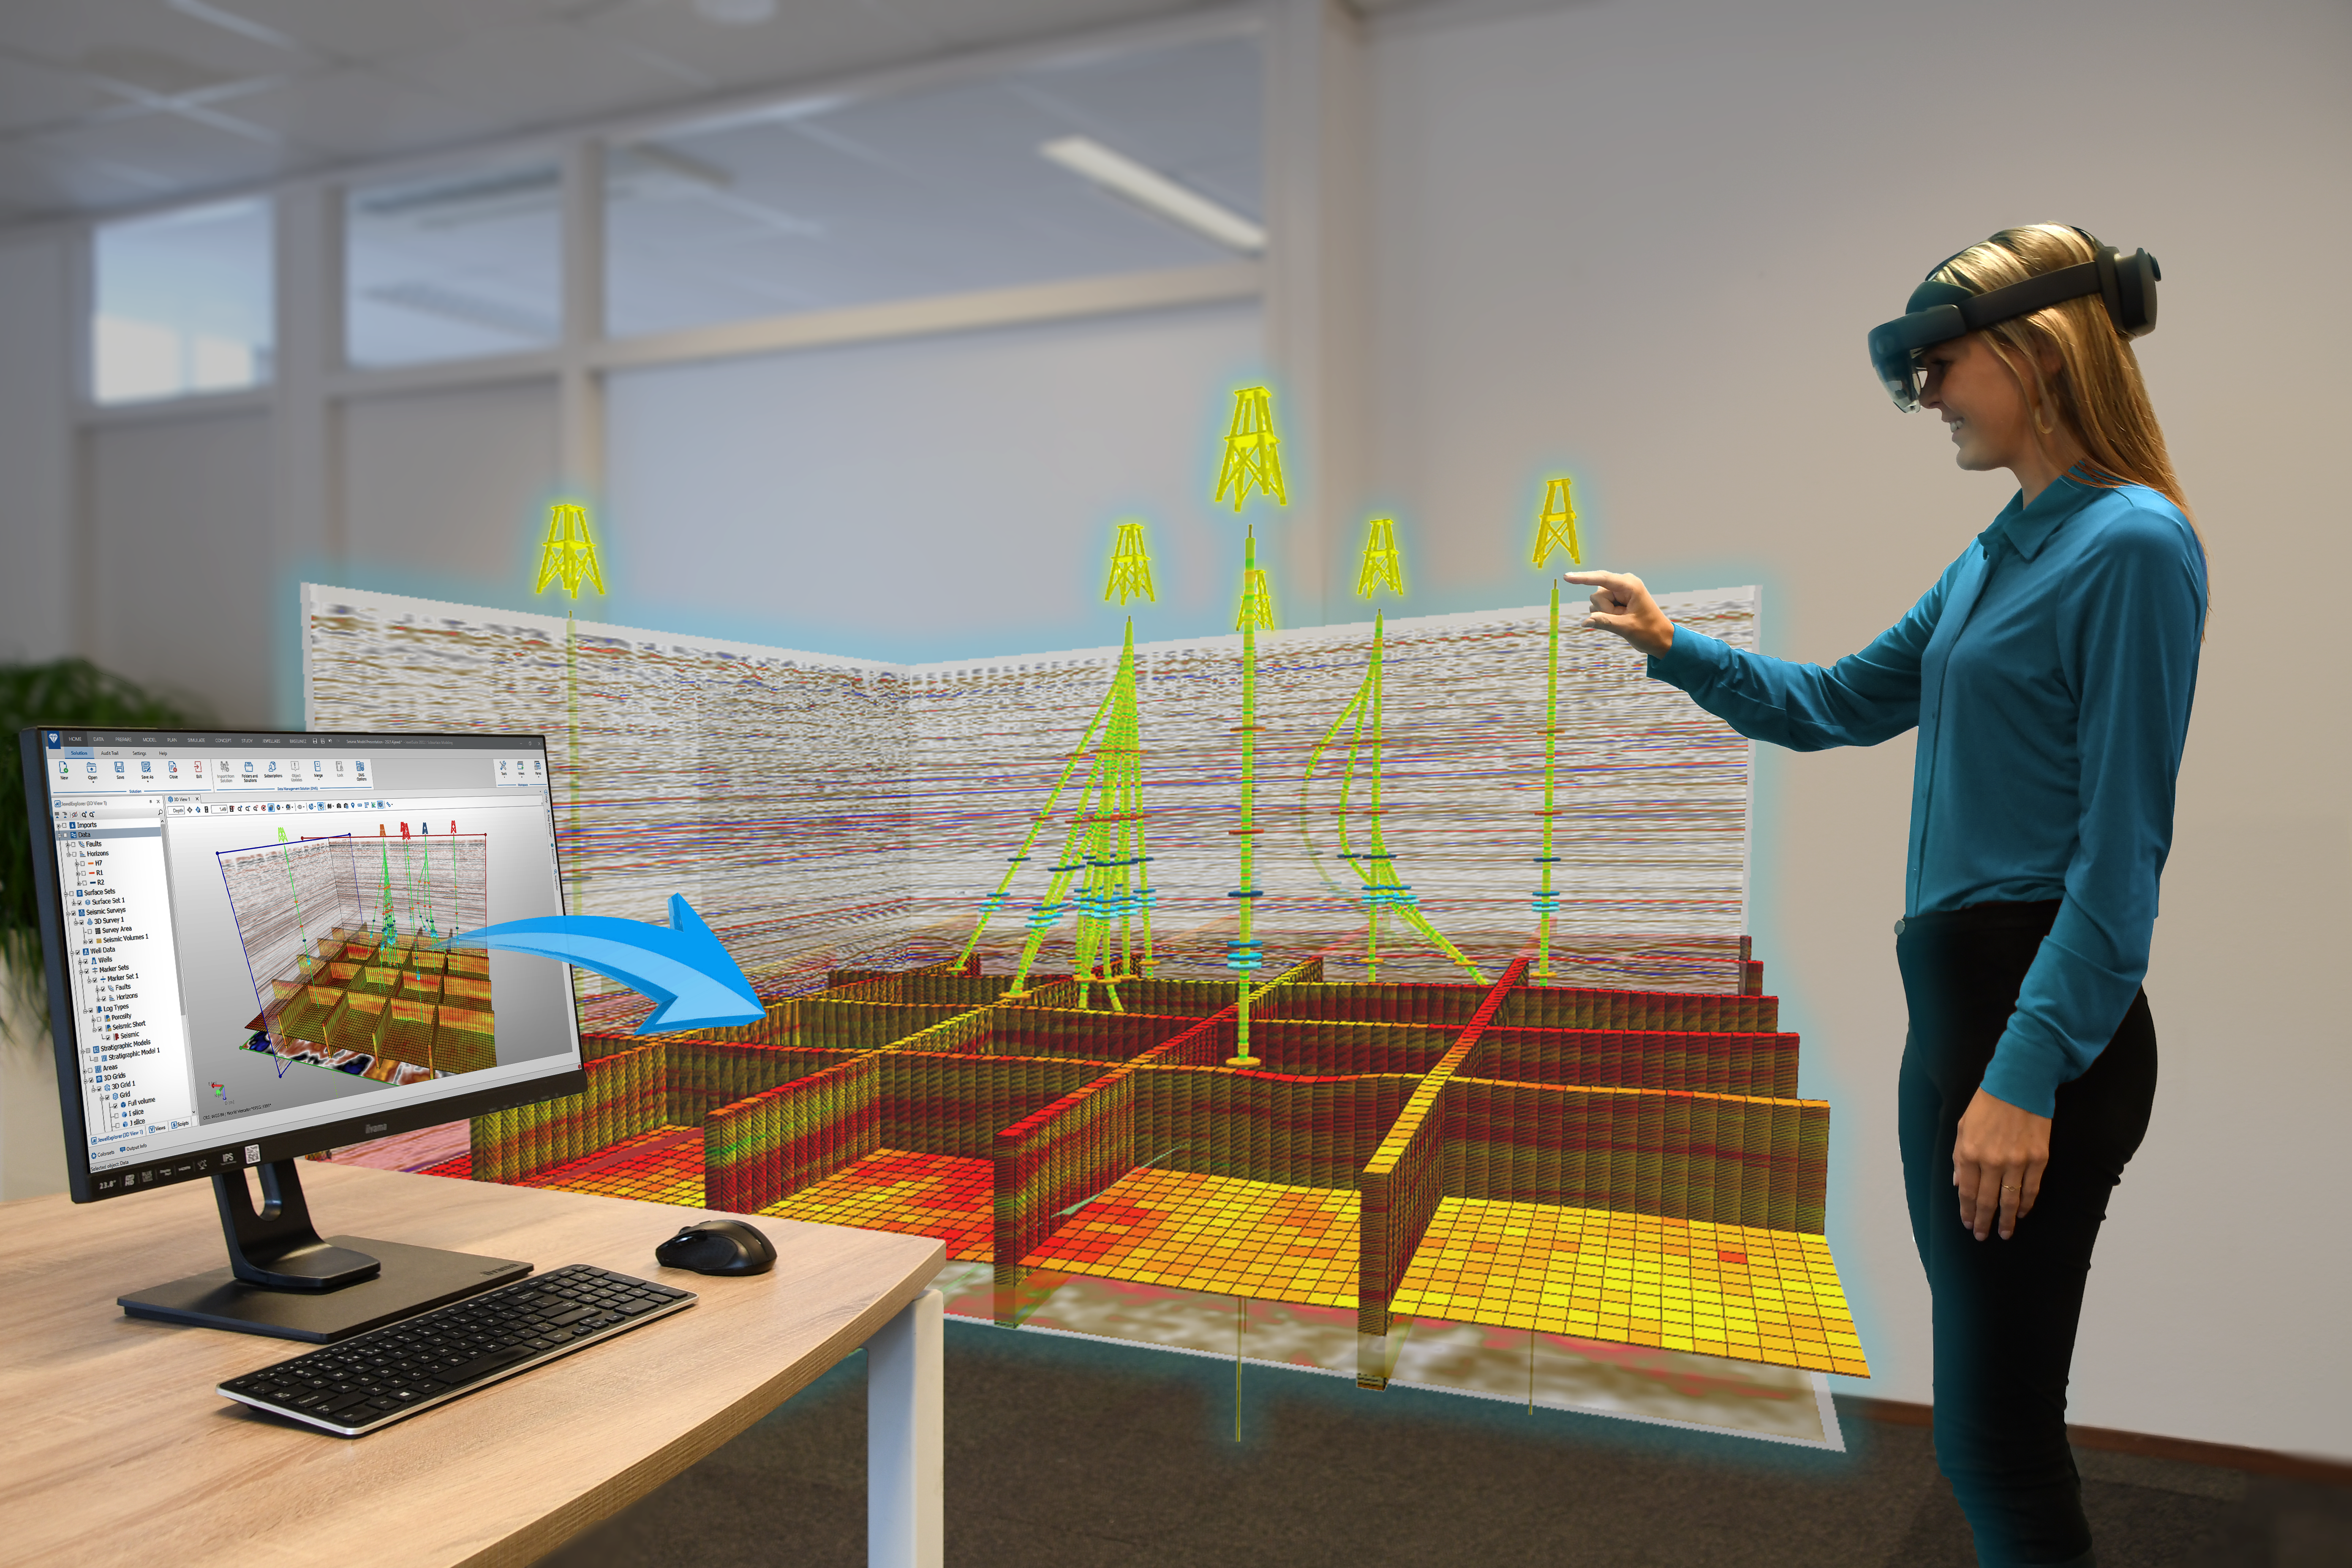 A user with a mixed reality headset views a 3D geological model at scale complimenting the PC workstation. (Source: BaselineZ)